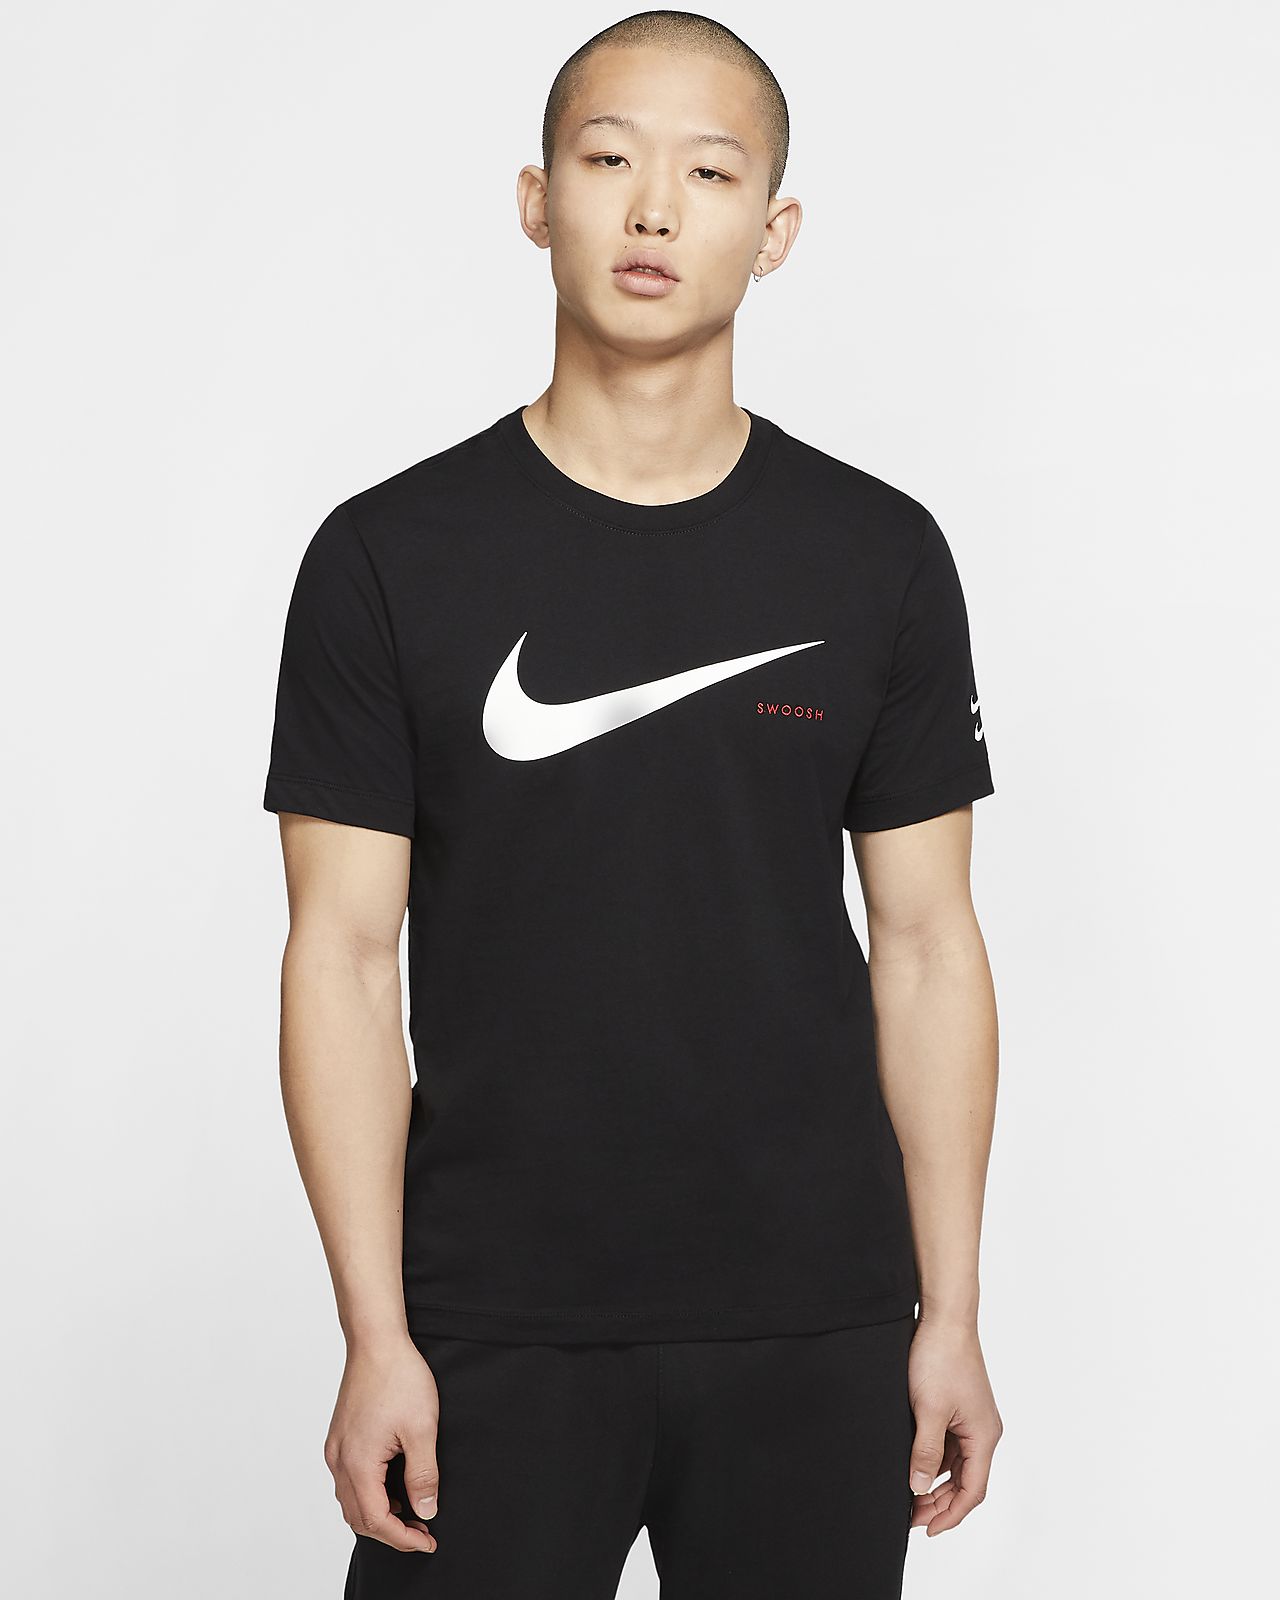 the nike t shirt Online